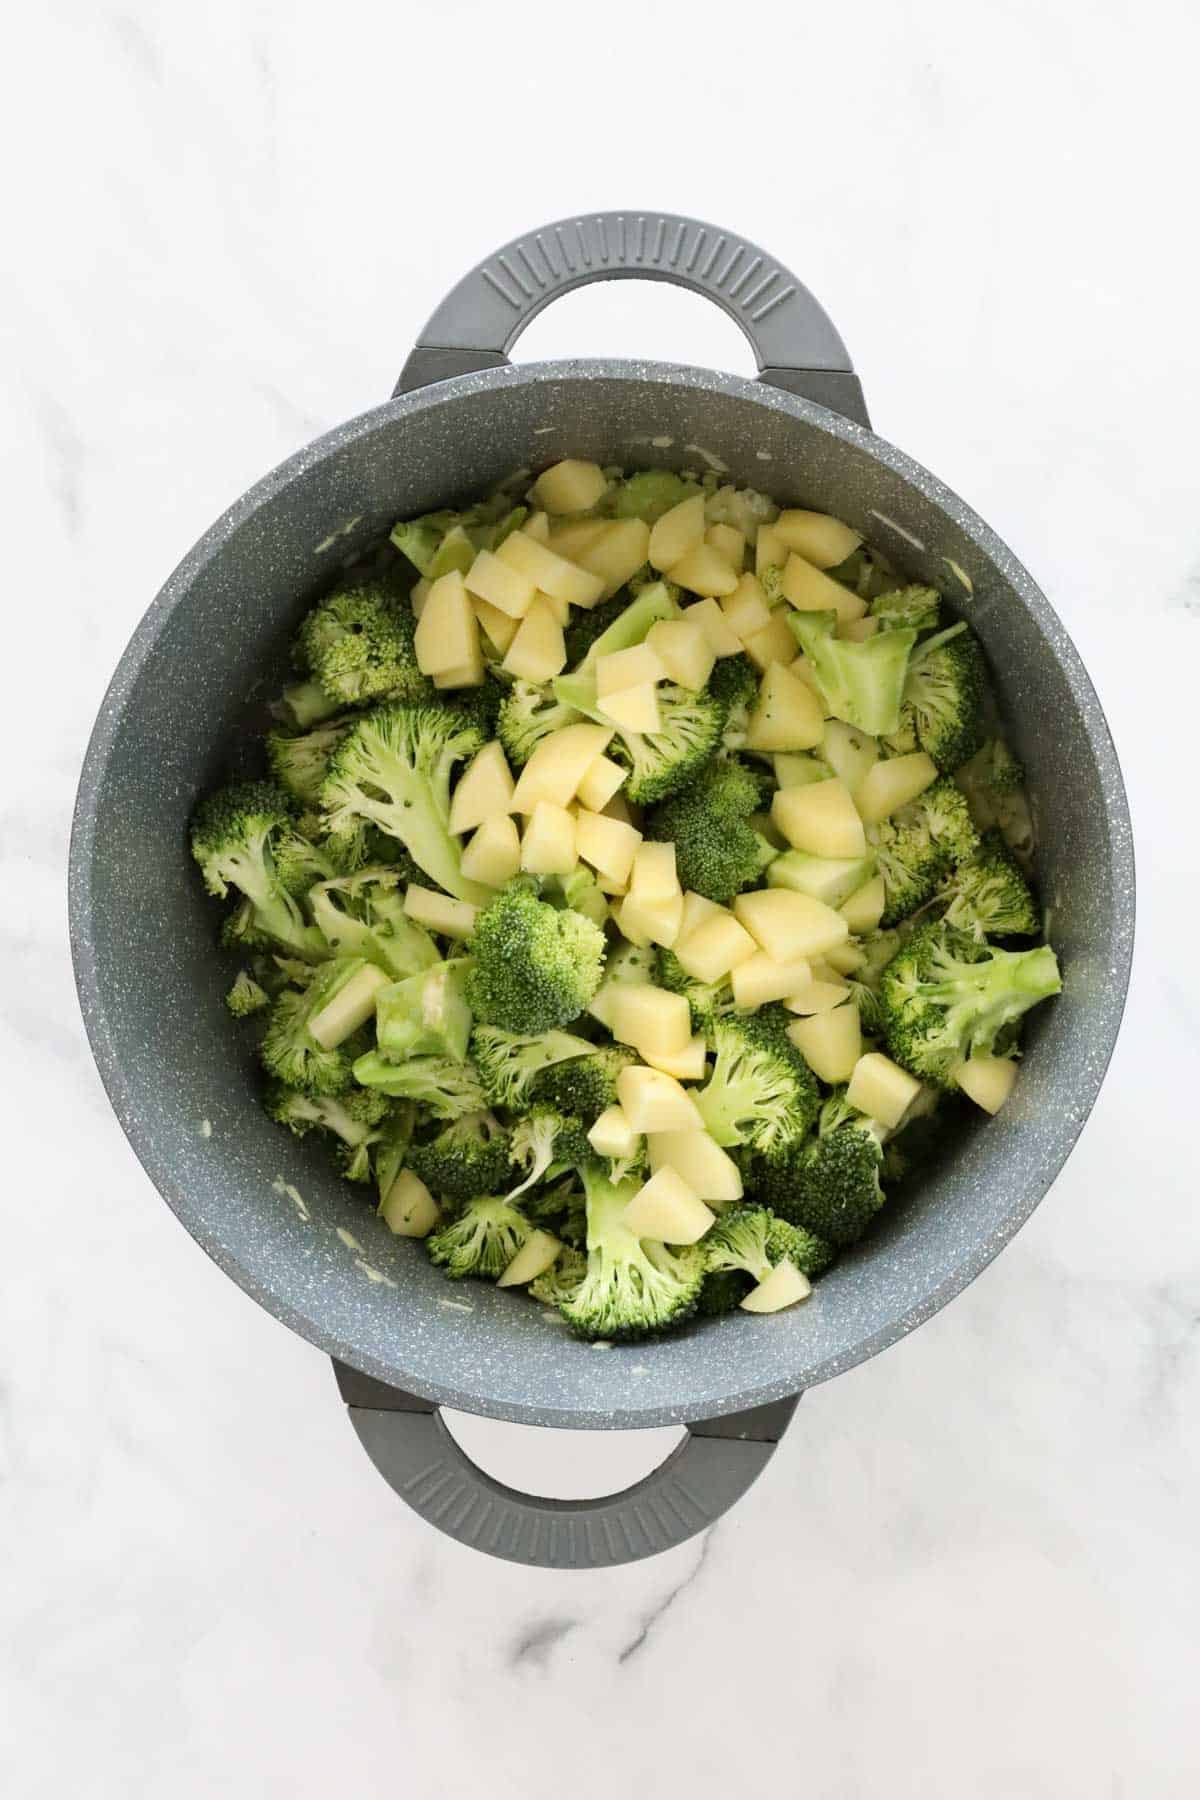 Diced potato and broccoli florets added to the pot.